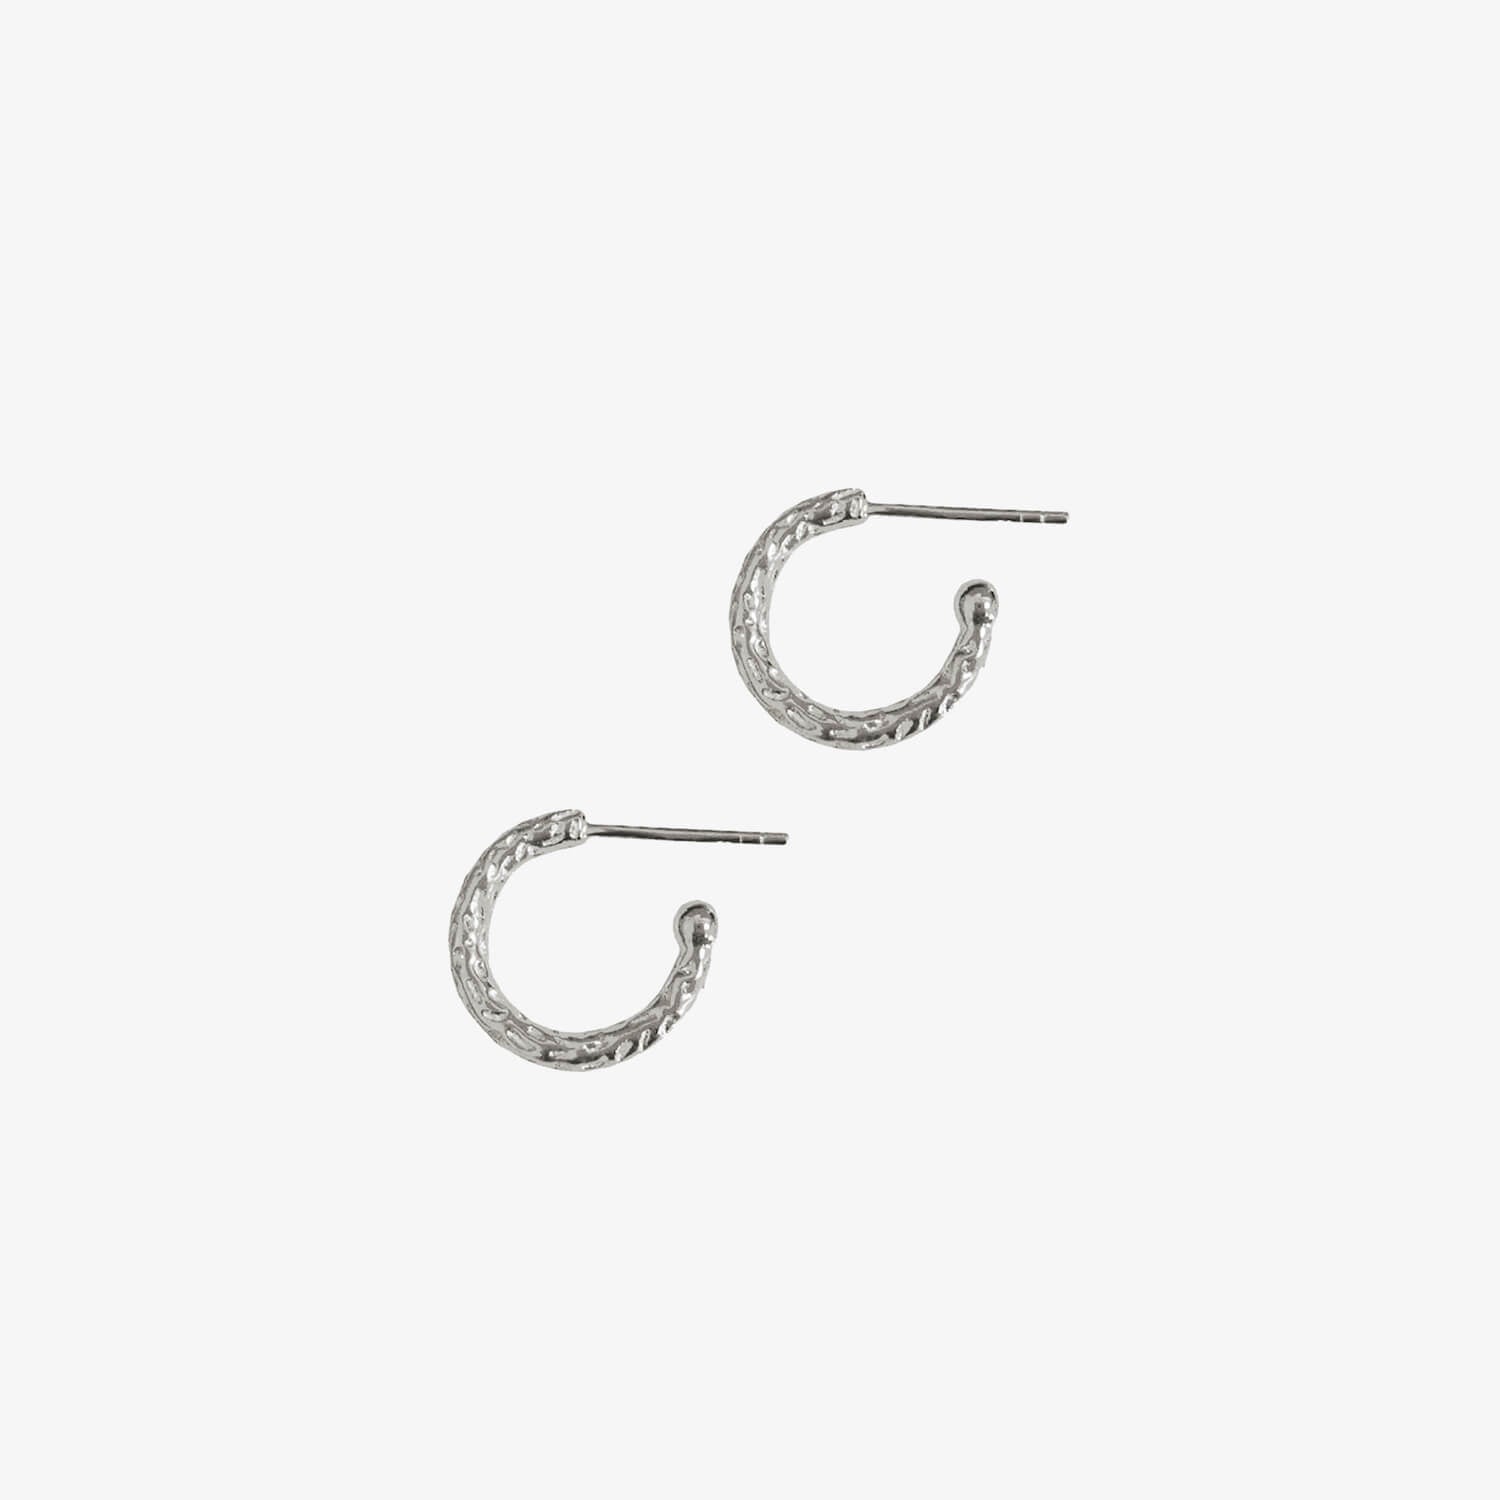 Small silver textured huggy hoops on a white background